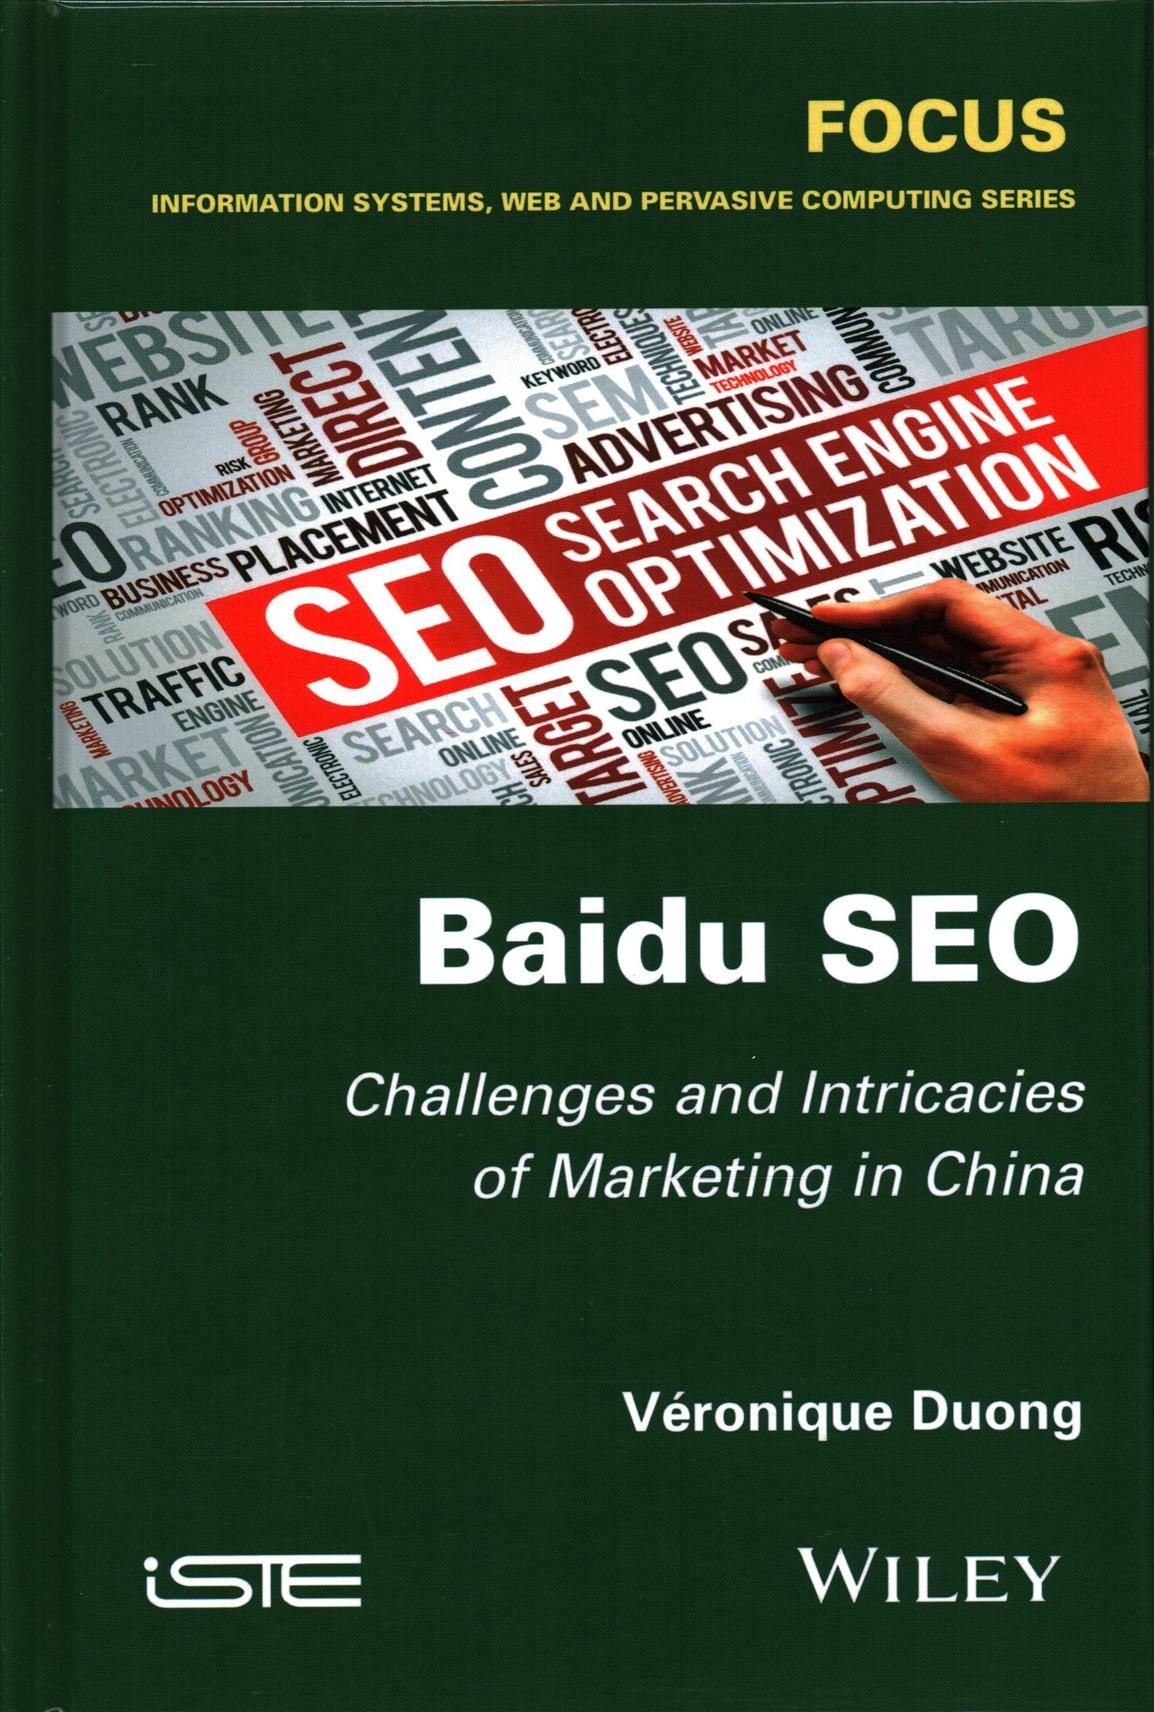 Baidu SEO - Challenges and Intricacies of Marketing in China